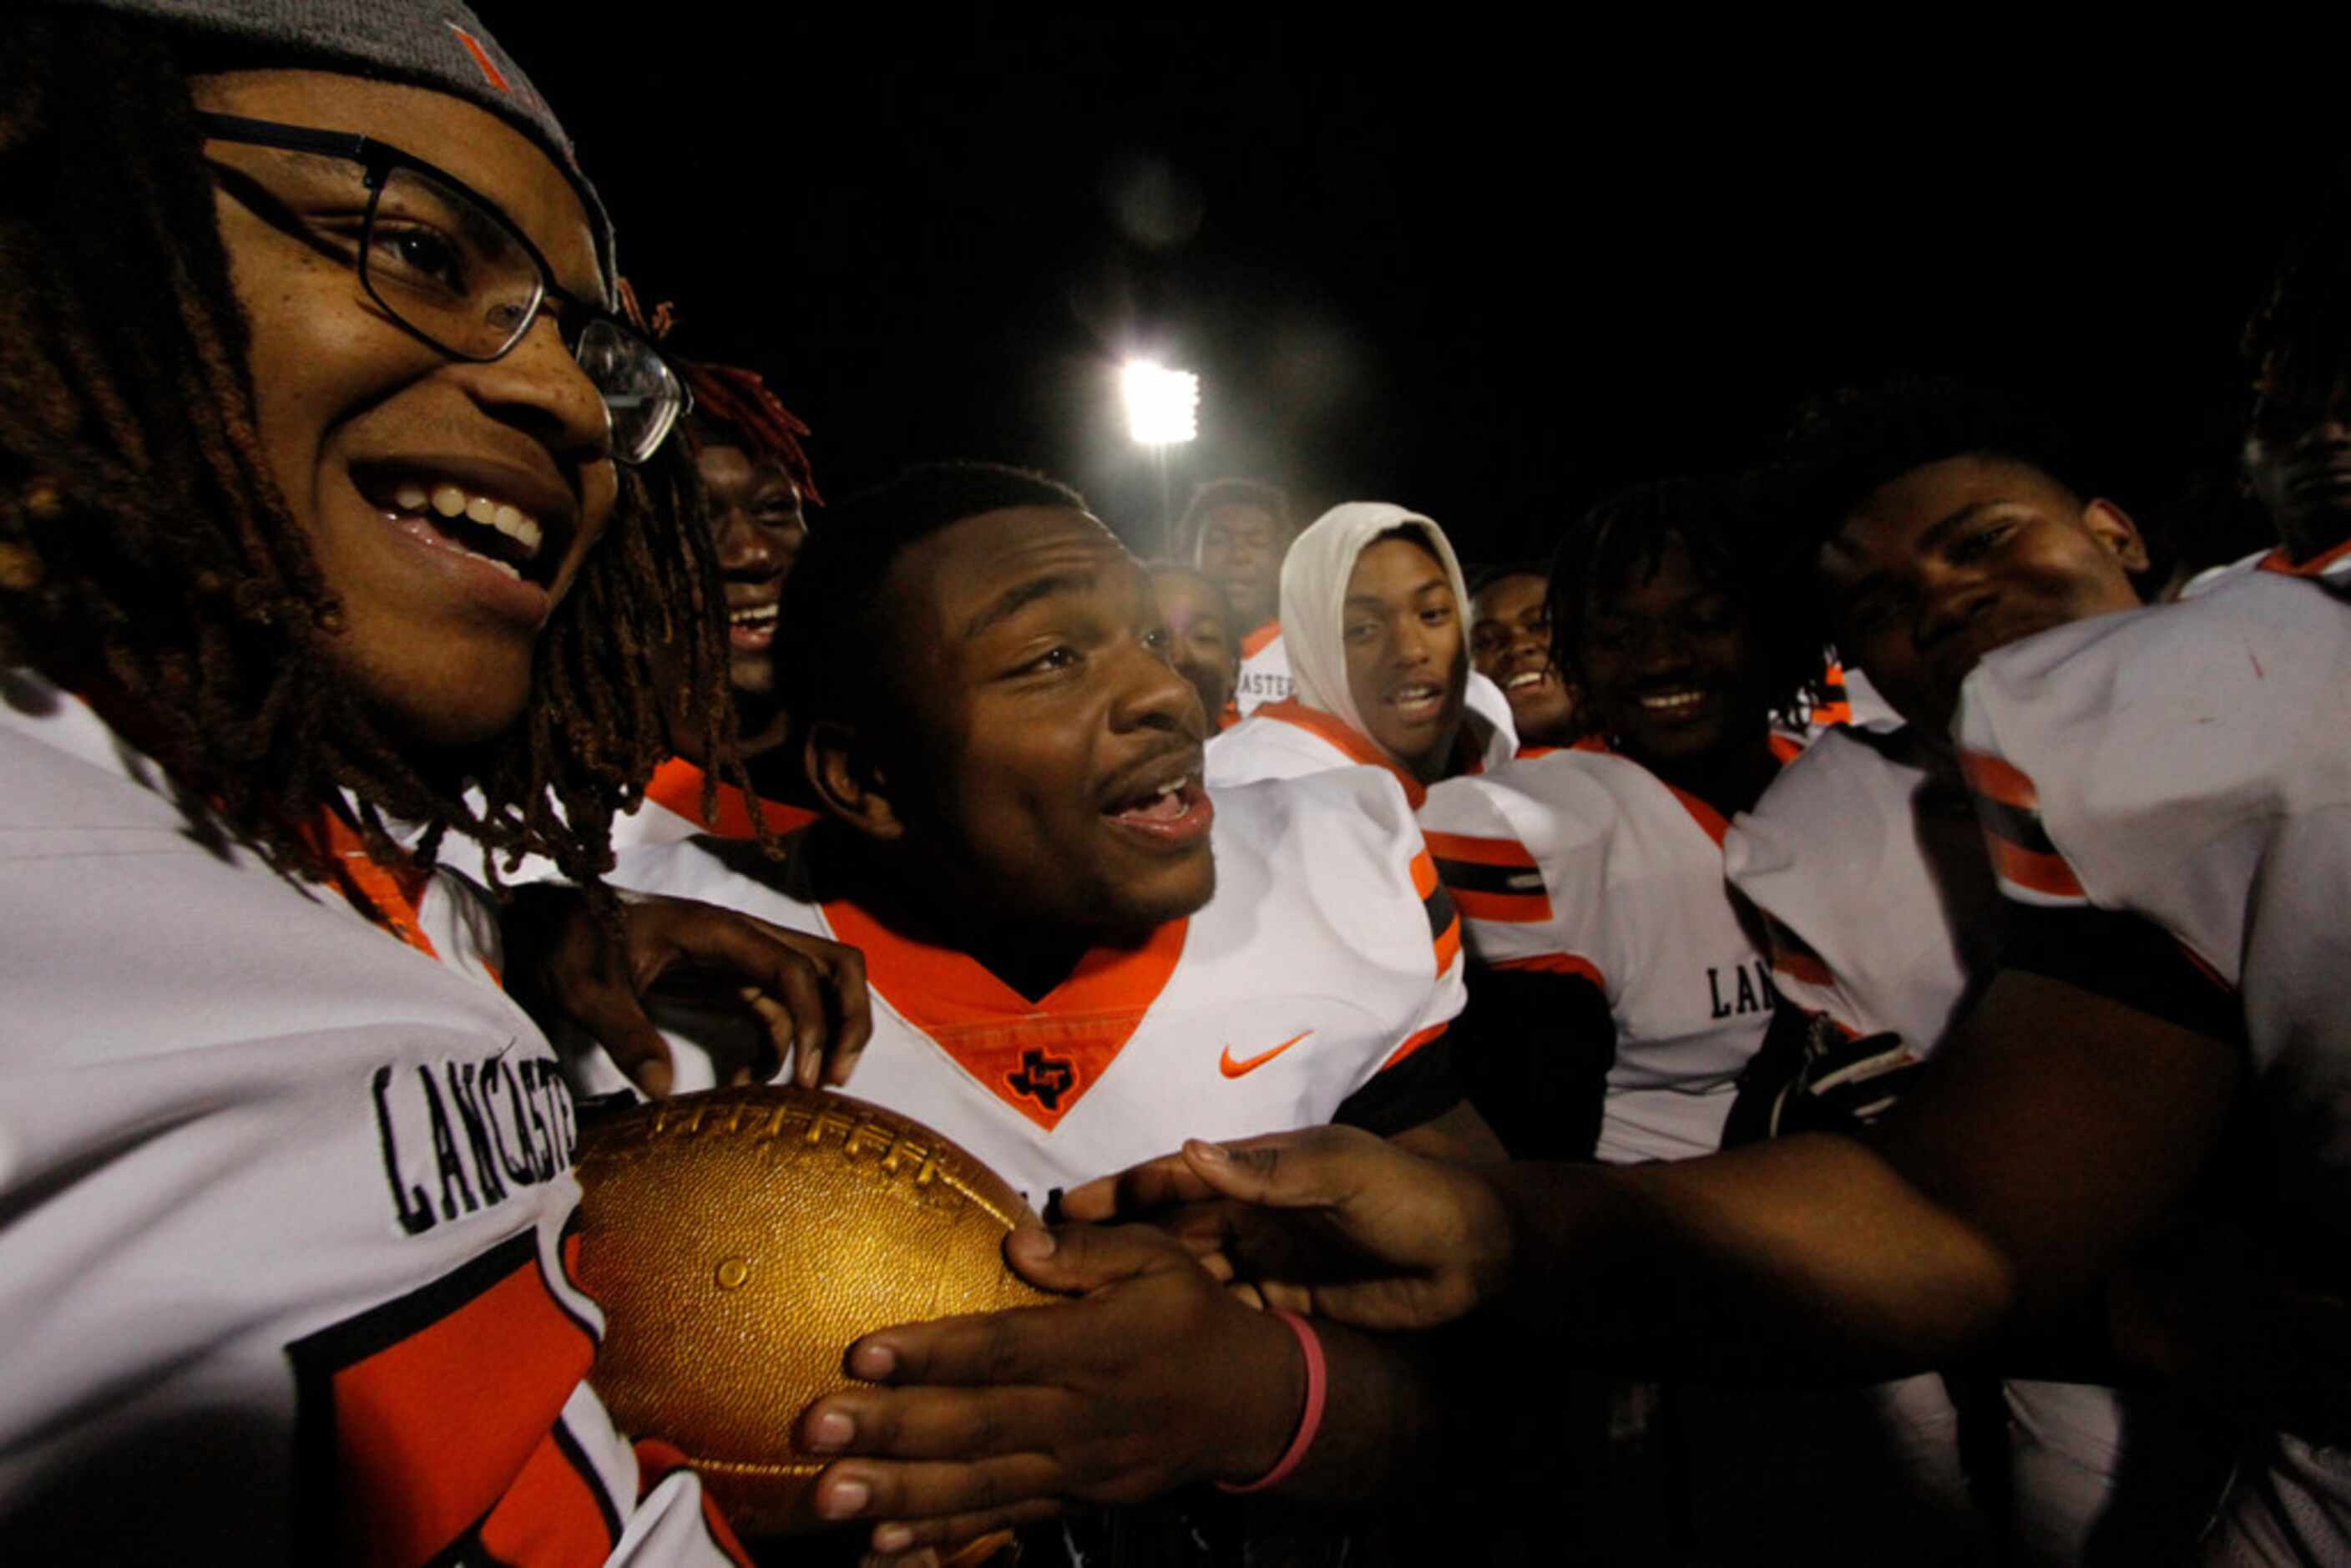 Members of the Lancaster Tigers move in to touch the Division l area trophy held by Kalen...